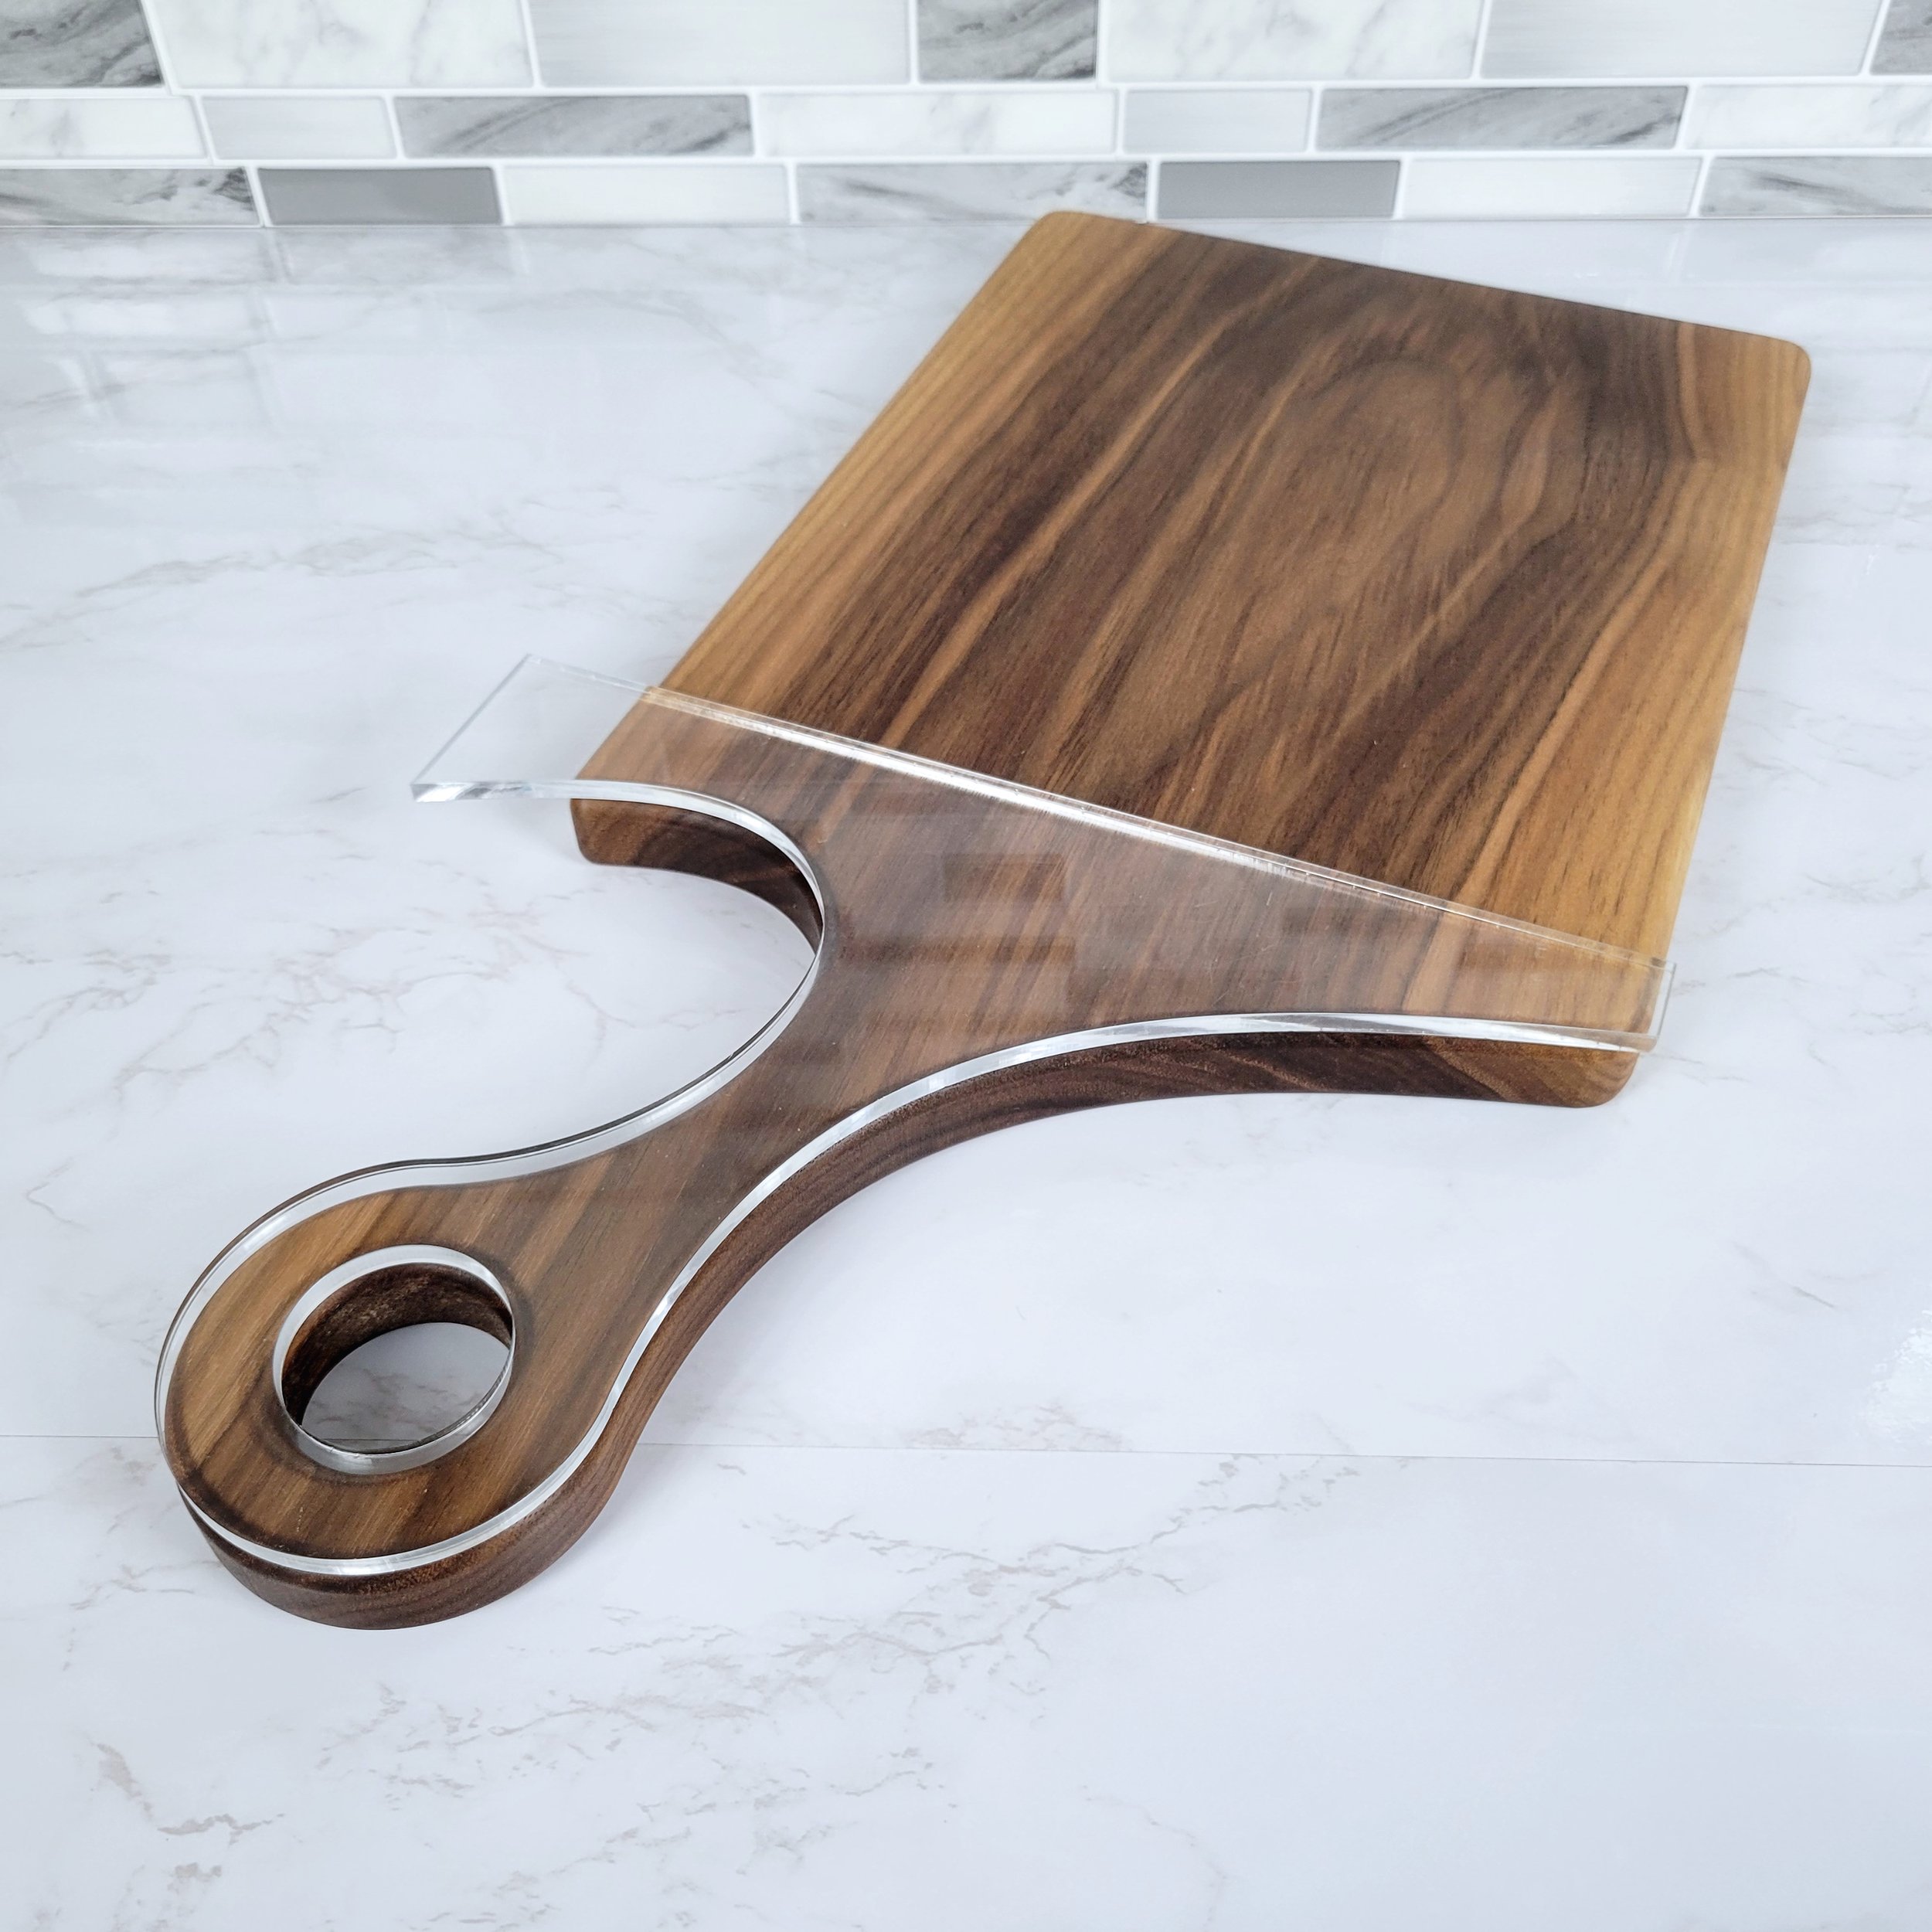 triangle-cutting-board-corner-handle-acrylic-router-template-wood